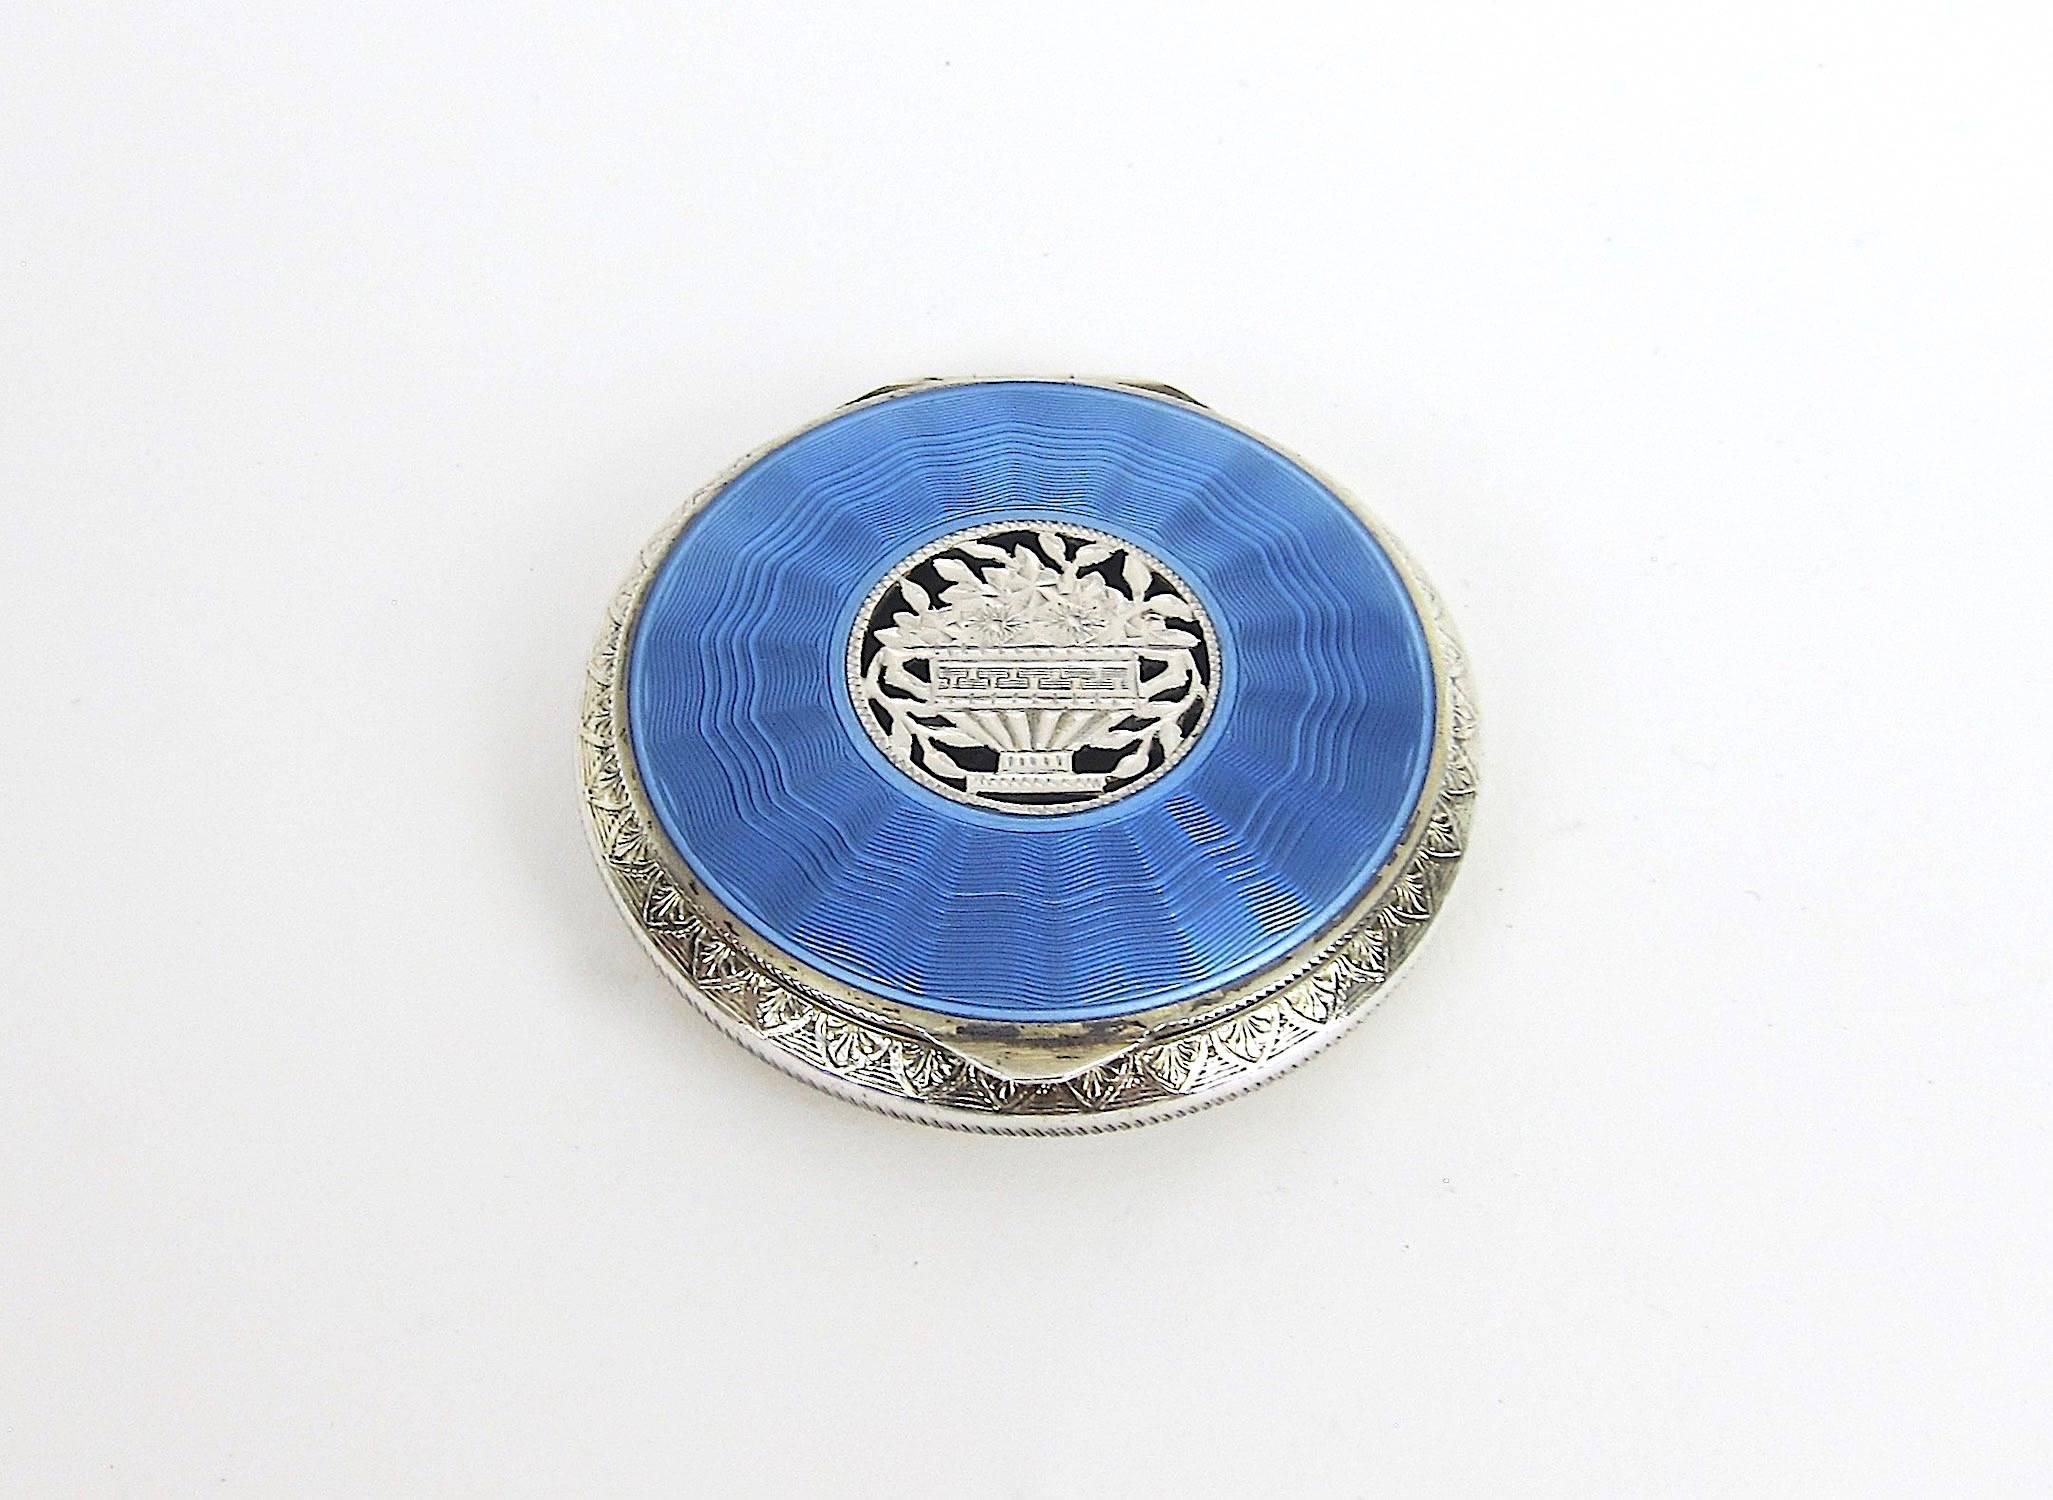 Edwardian Antique Austrian Sterling Silver and Guilloche Enamel Compact